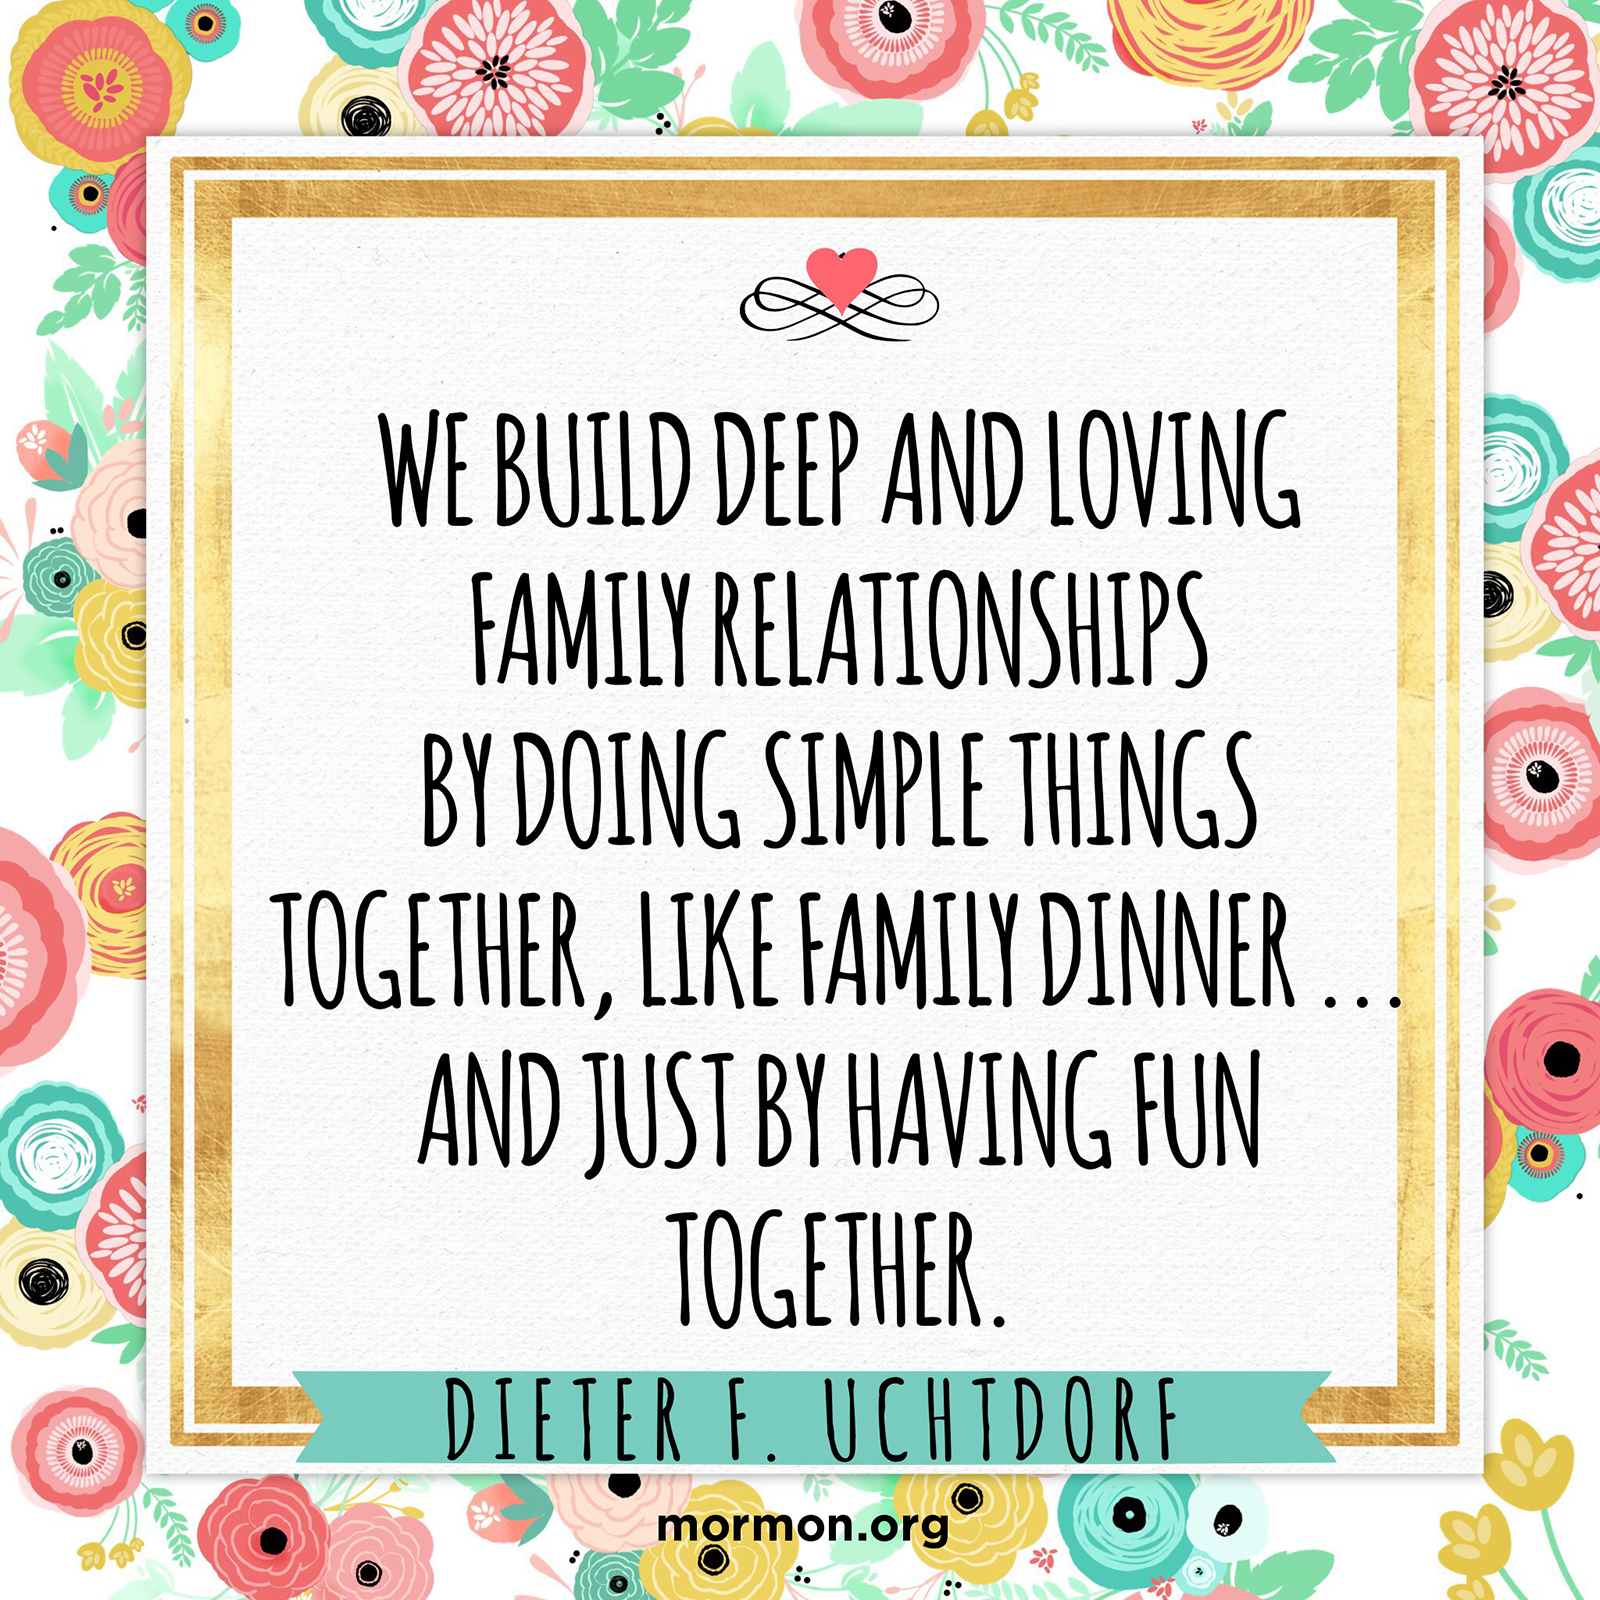 Building A Family Together - HD Wallpaper 